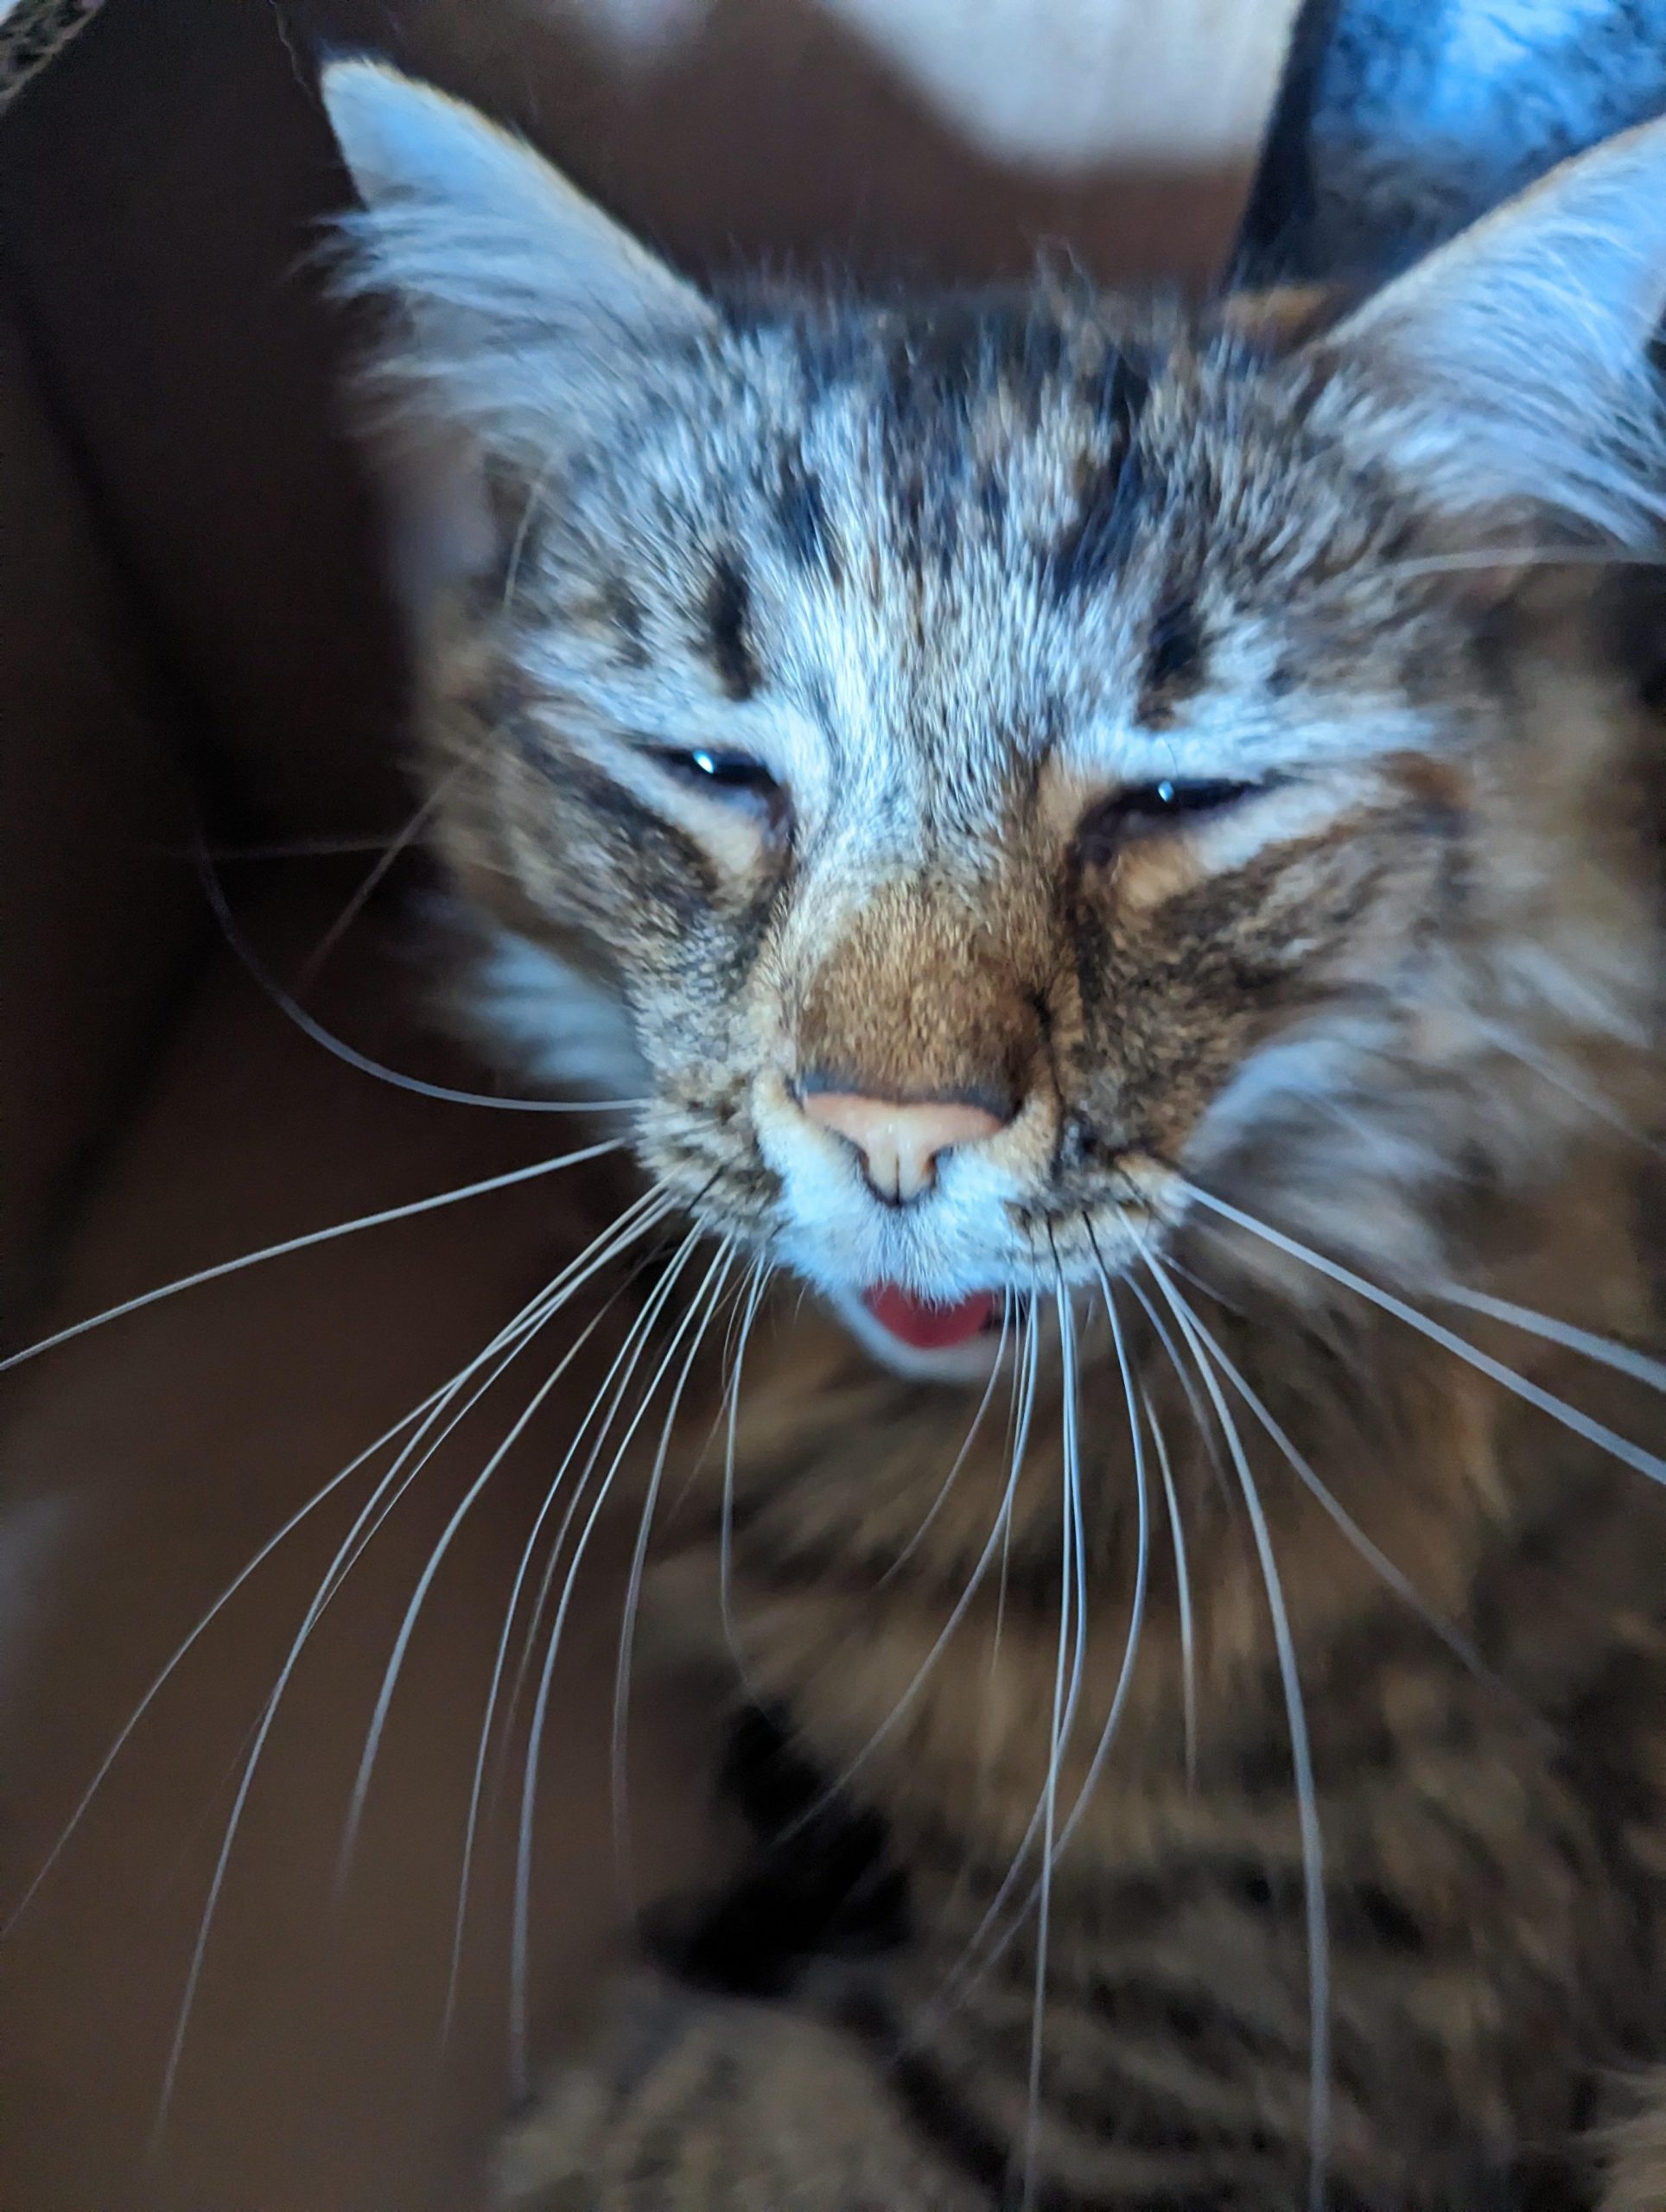 Here is my cat about to yawn.